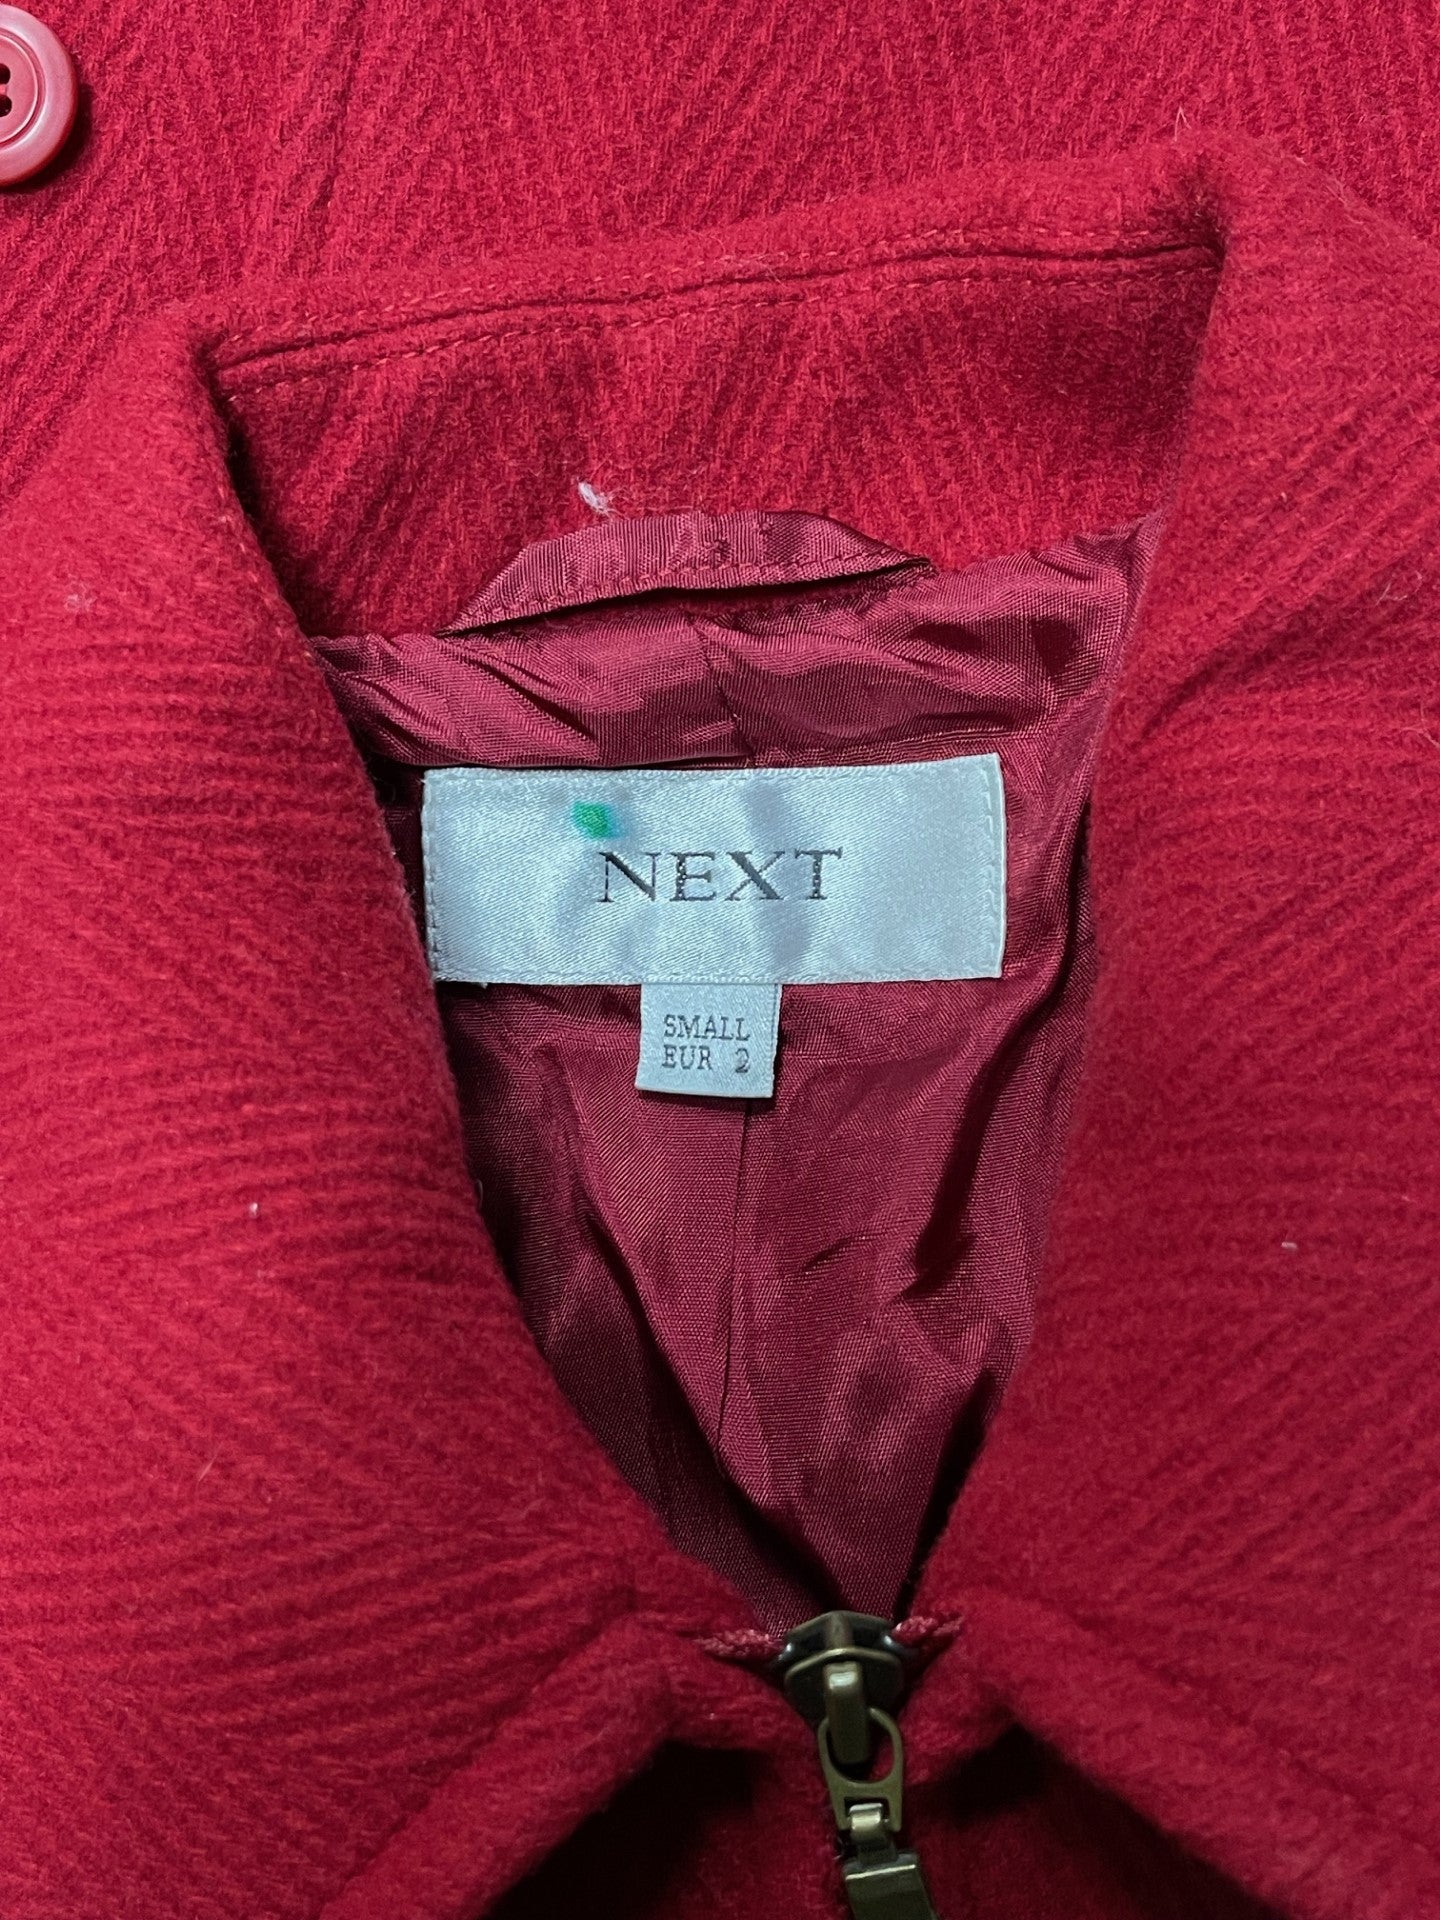 Next Vintage Red Wool Blend Jacket Small